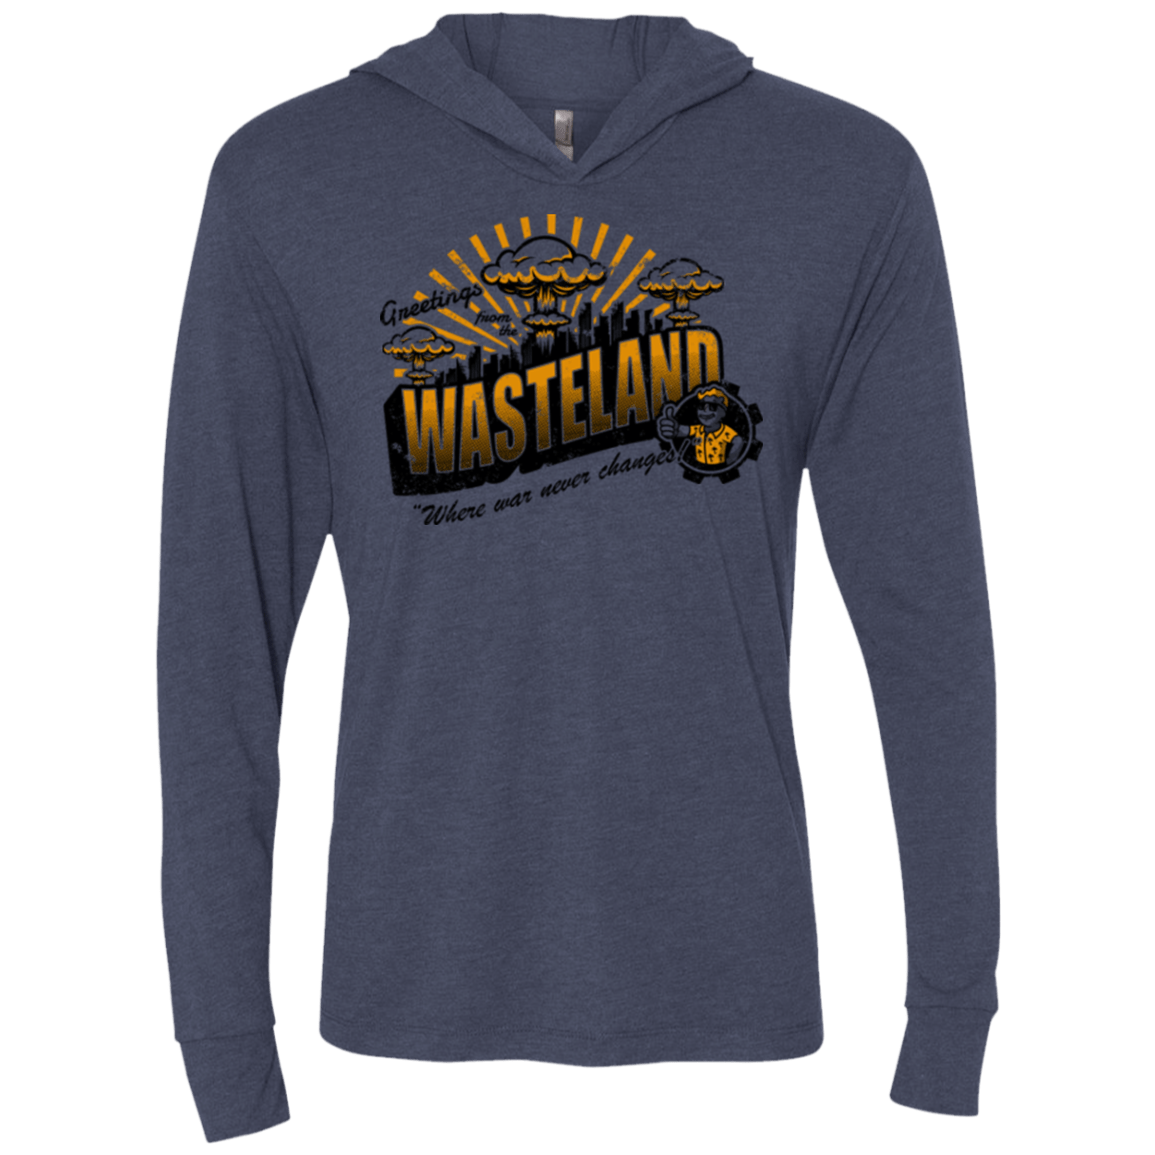 T-Shirts Vintage Navy / X-Small Greetings from the Wasteland! Triblend Long Sleeve Hoodie Tee